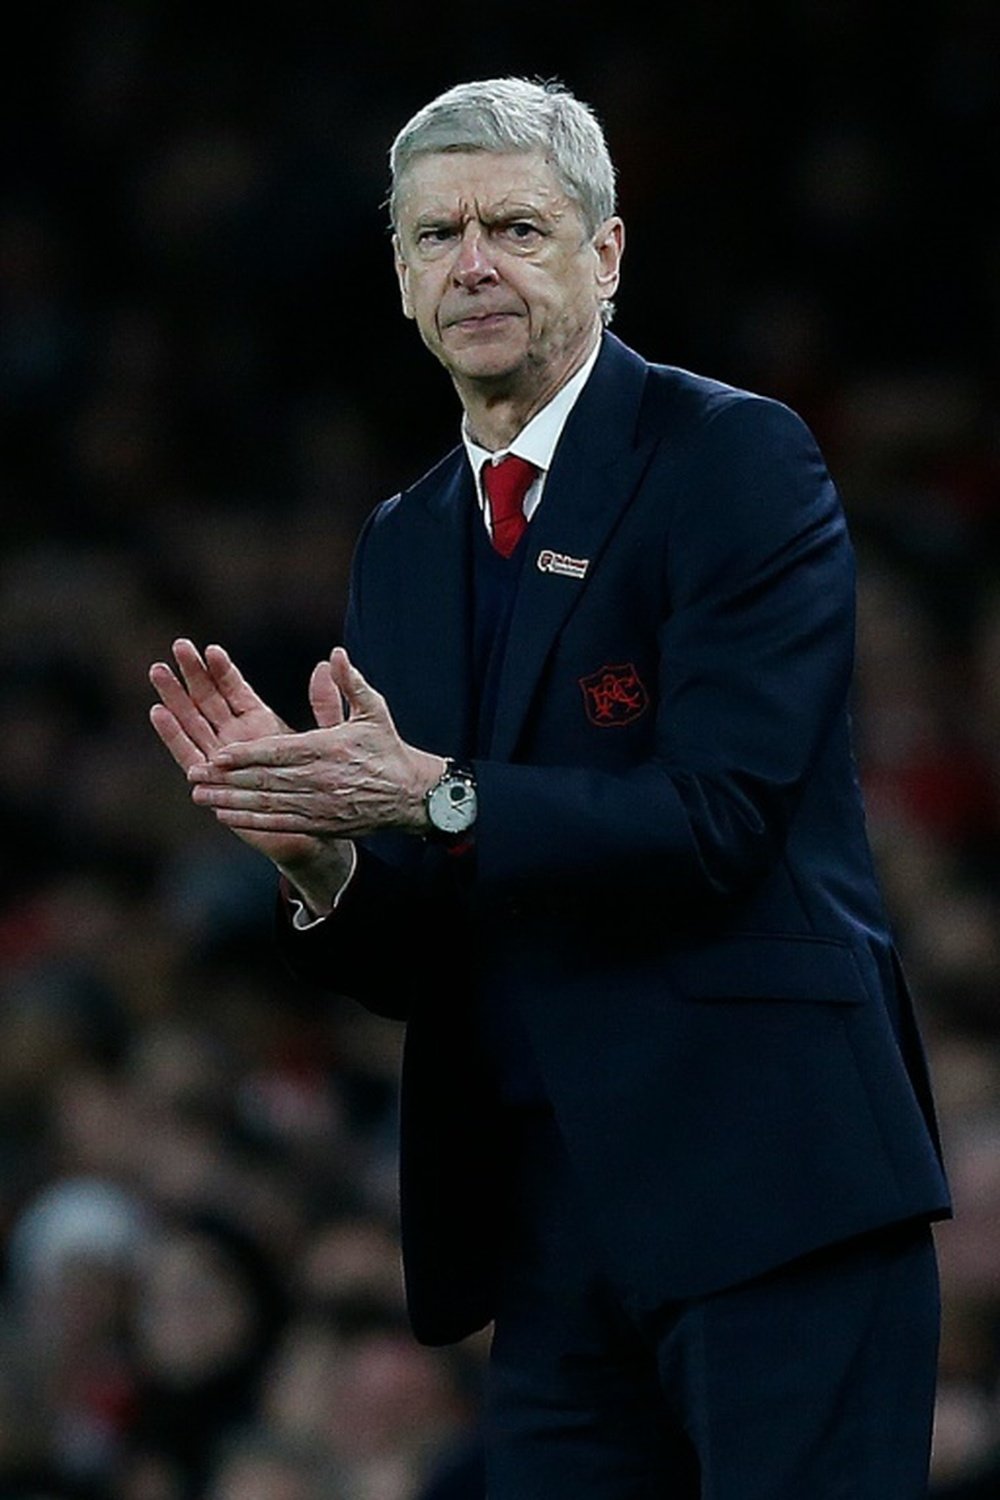 Arsenal's manager Arsene Wenger instructs his players from the touchline during their English Premier League match against Manchester City, at the Emirates Stadium in London, on December 21, 2015